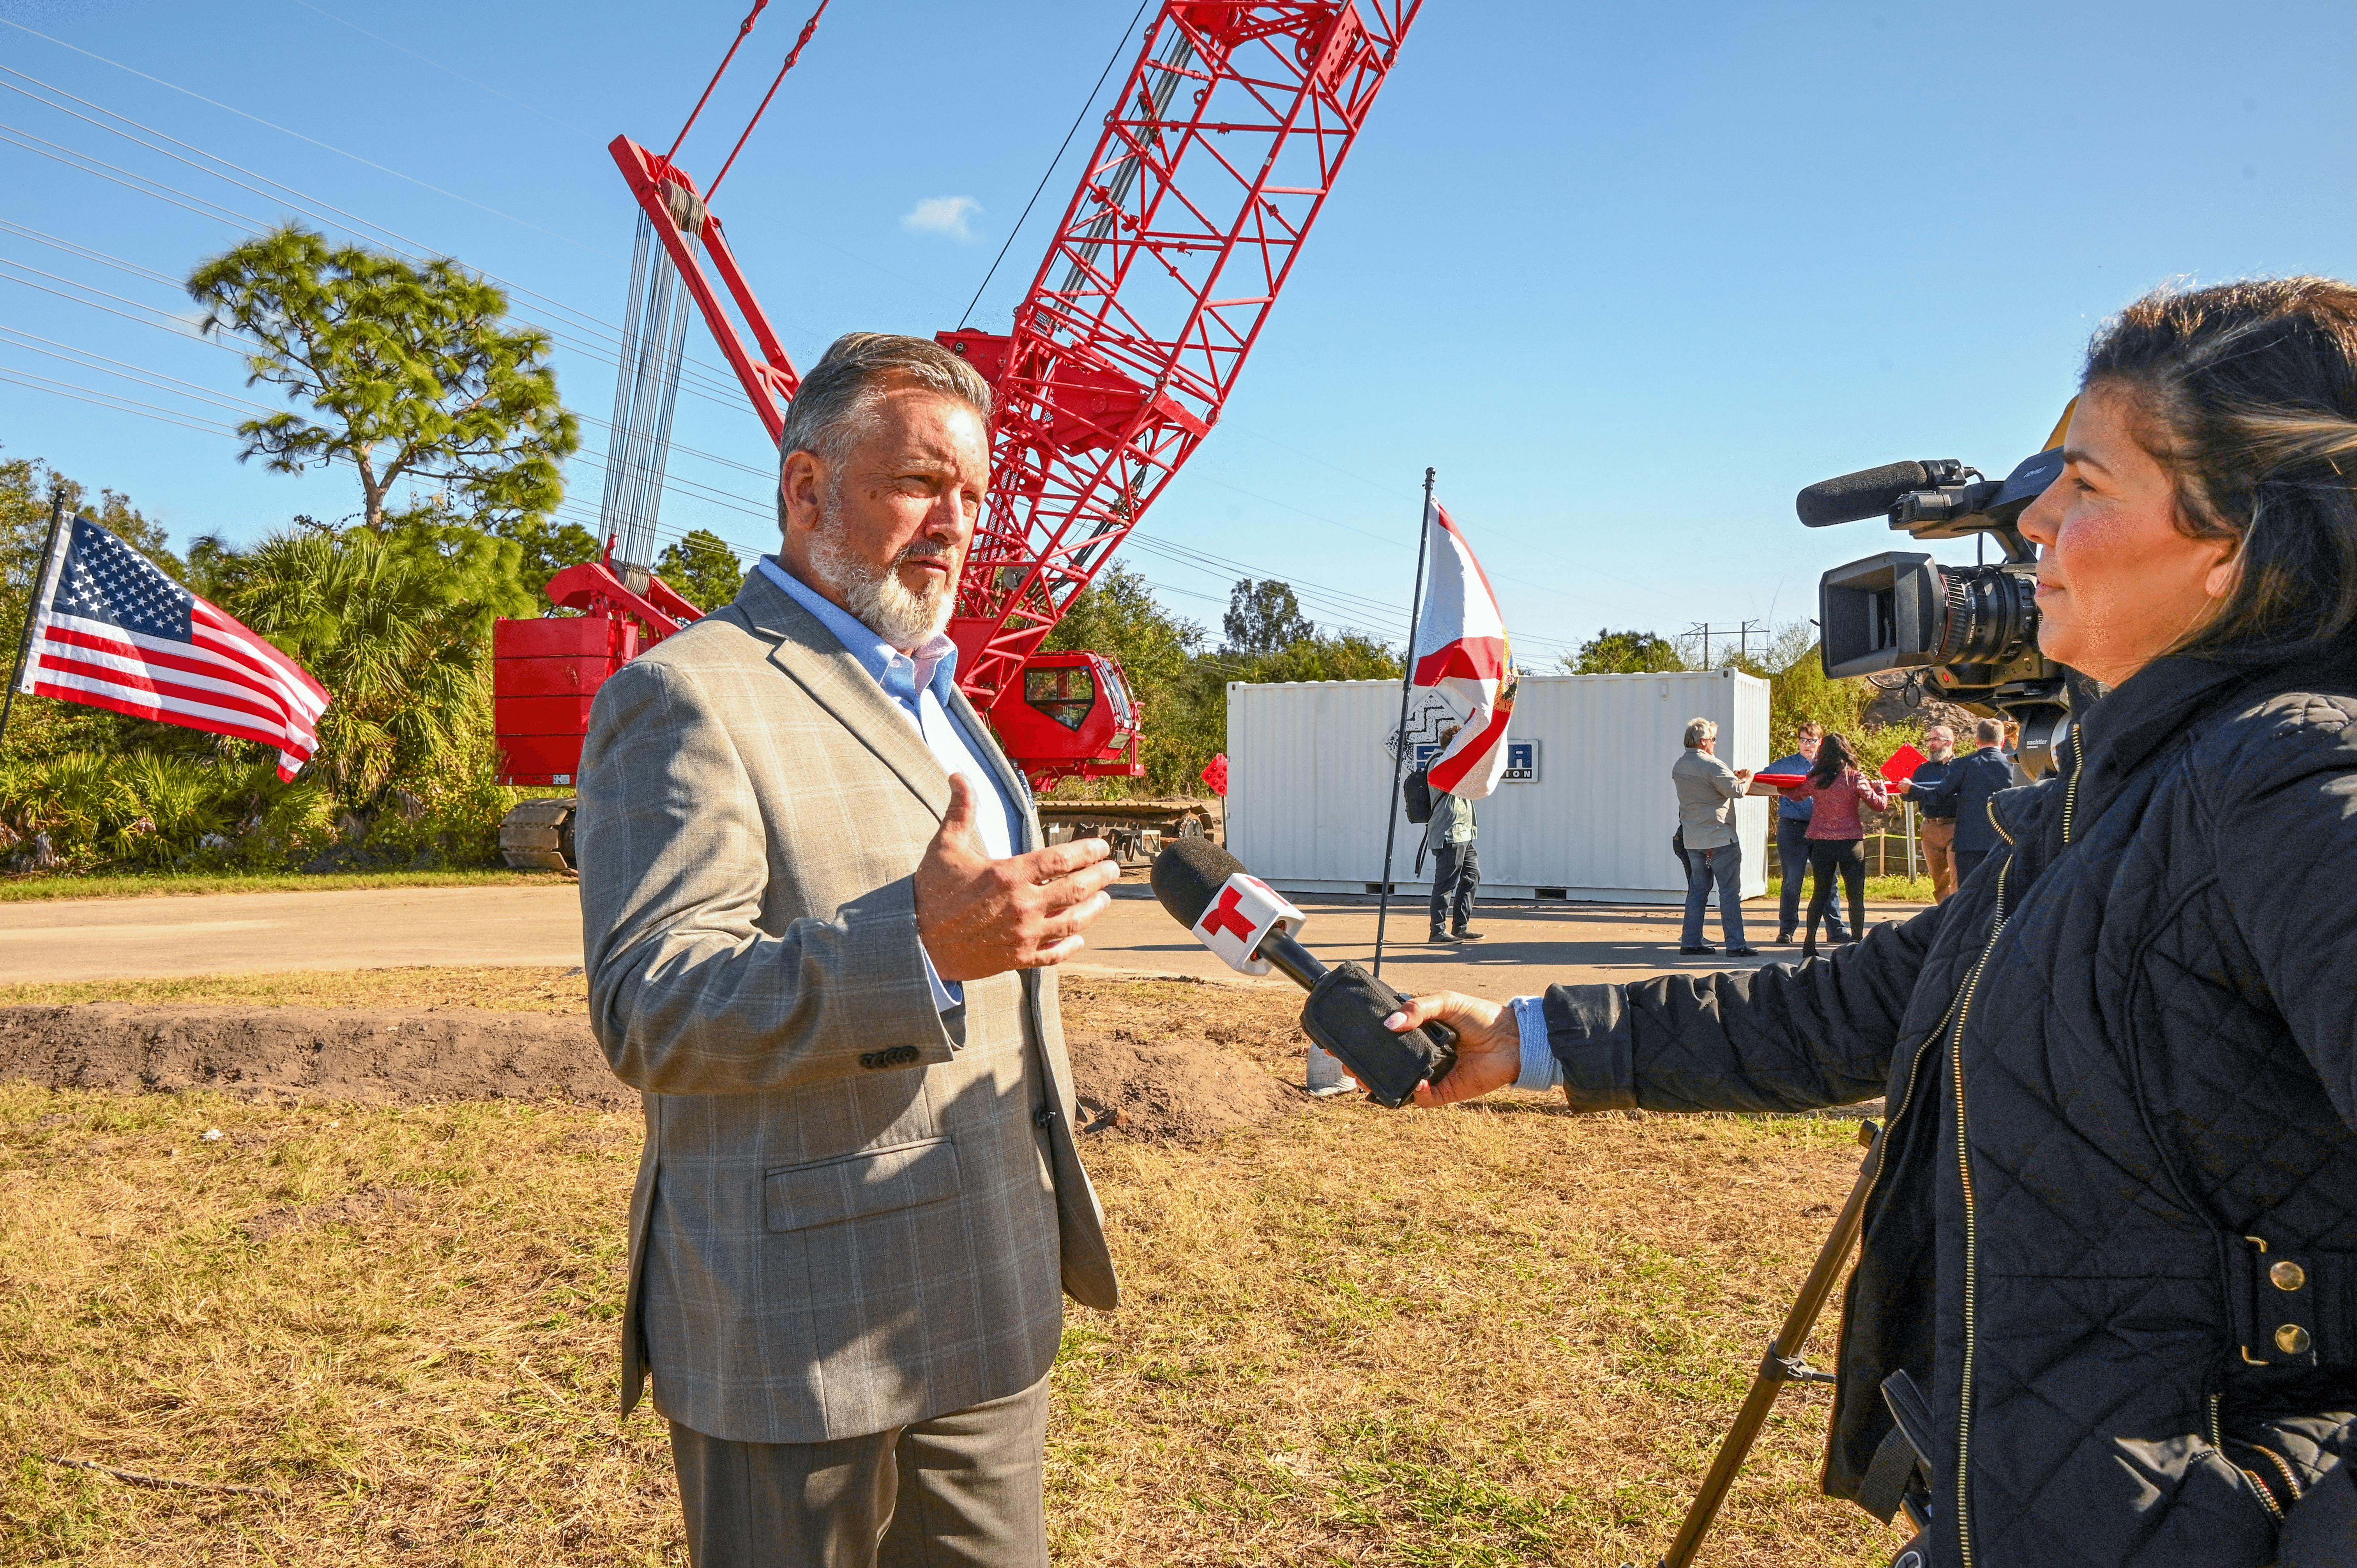 A man answering questions about the groundbreaking. A red crane is shown in the background.